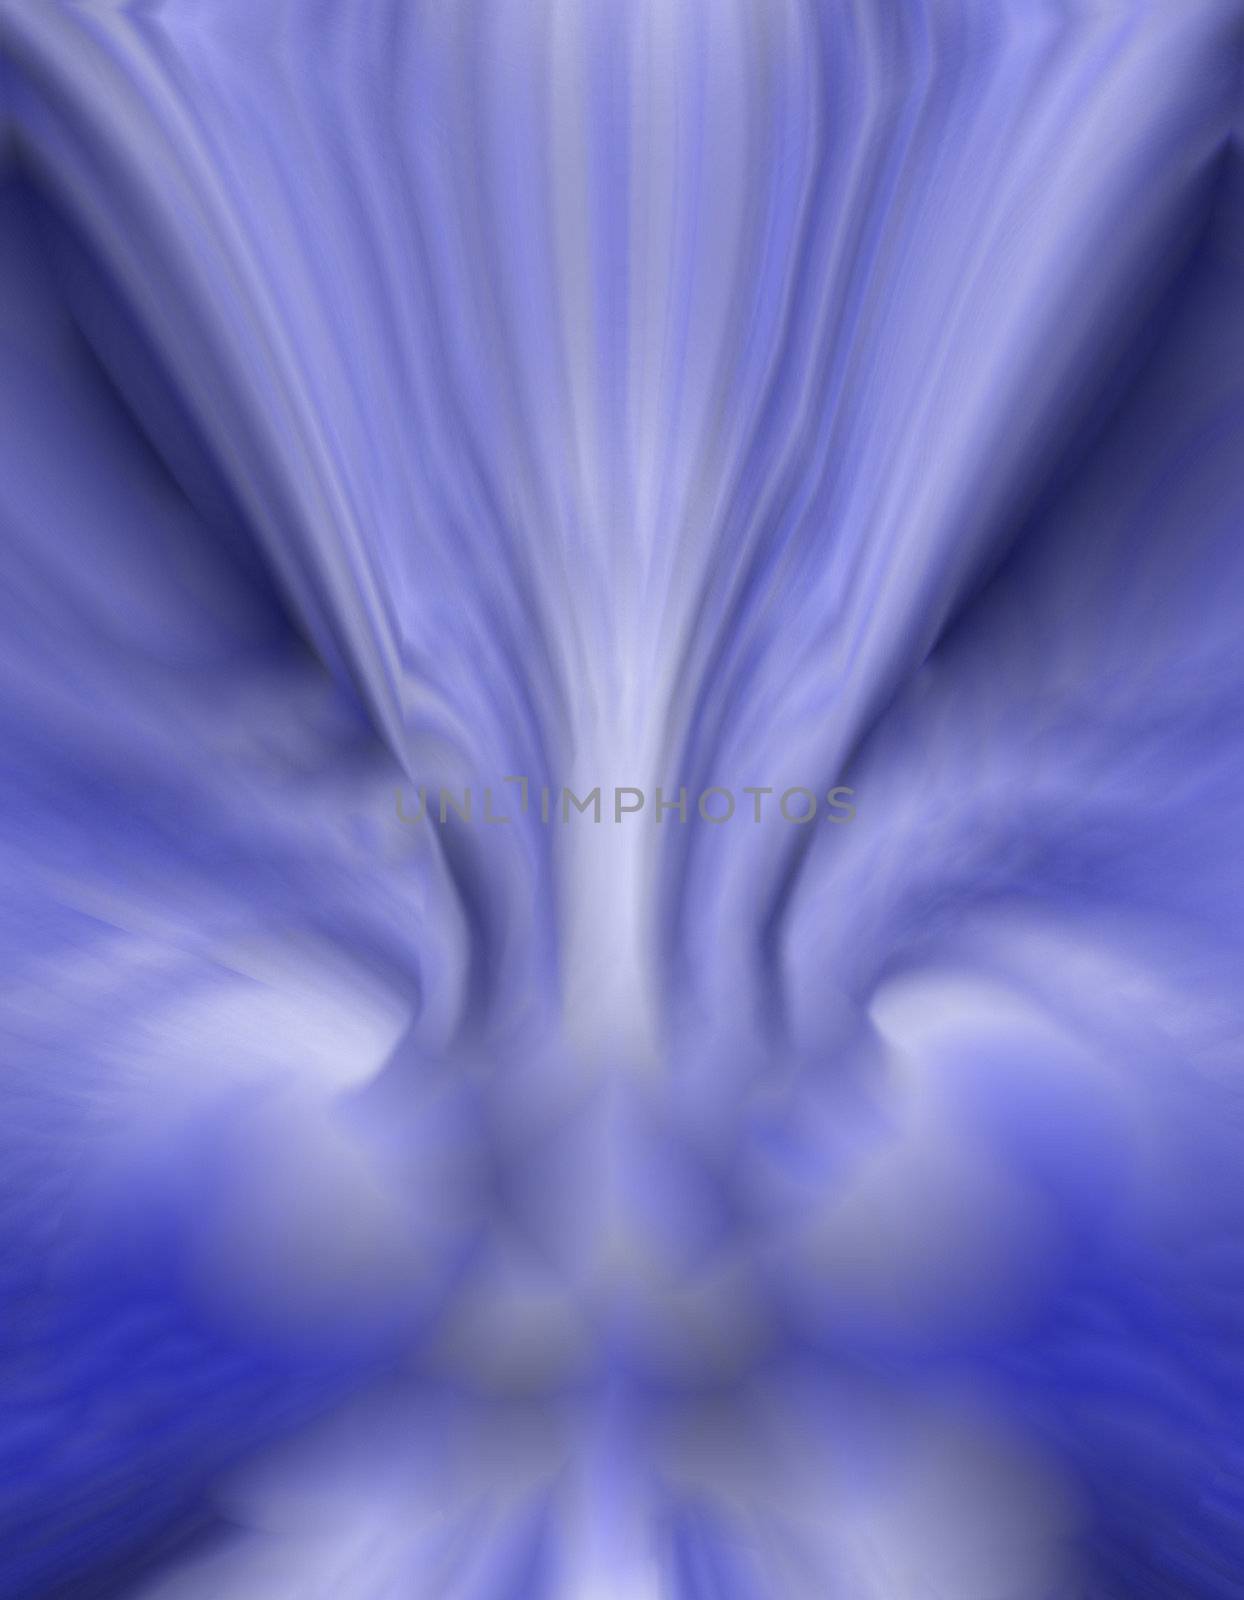 blue flowing abstract background appearing like moving water